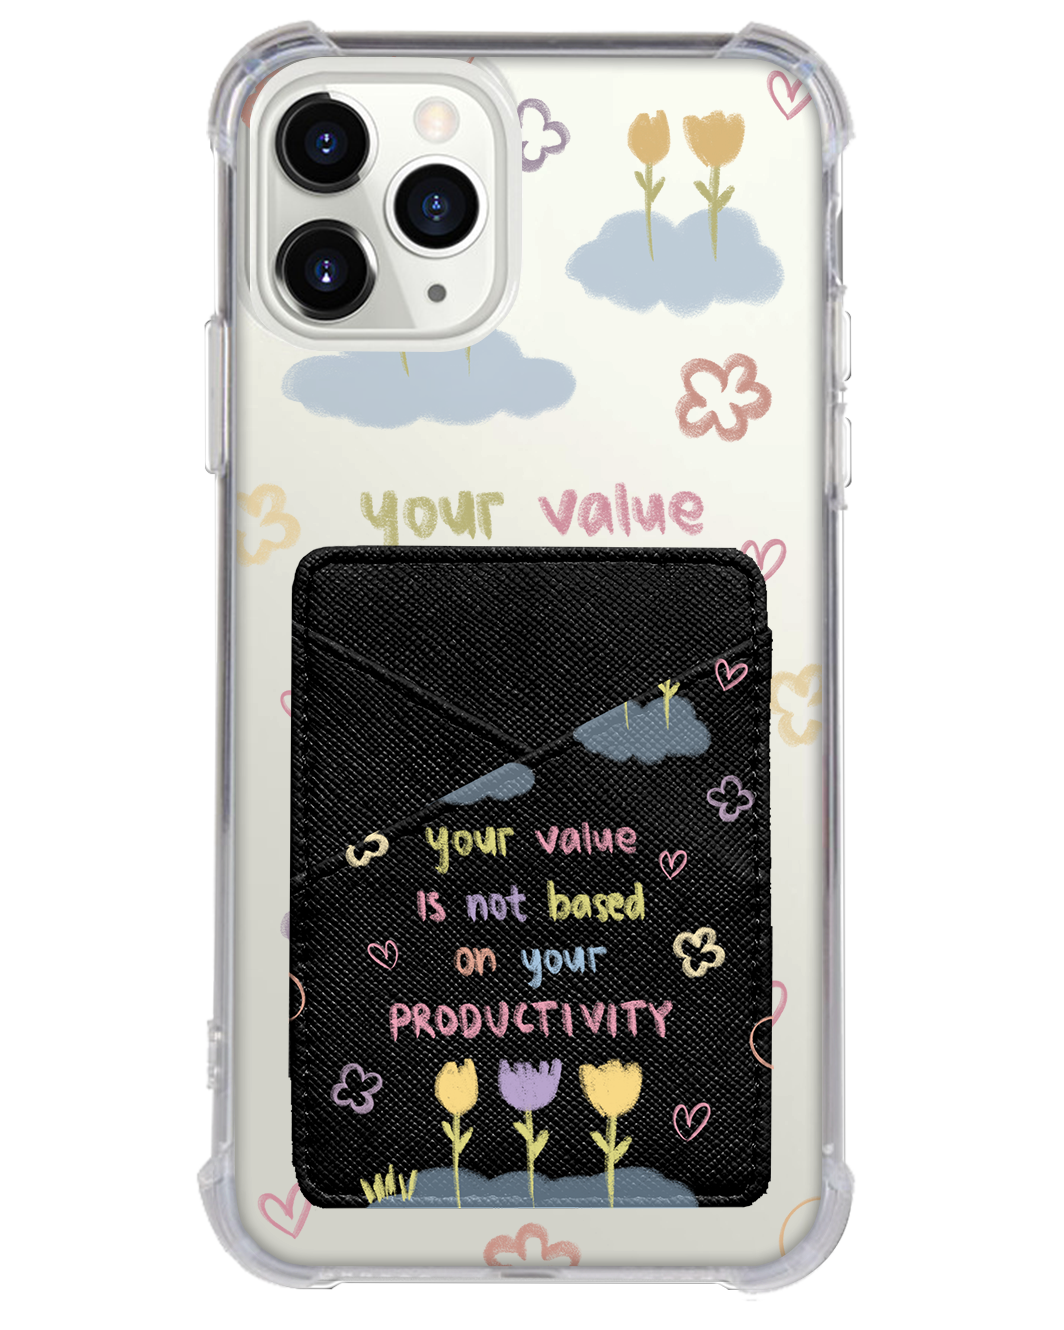 iPhone Phone Wallet Case - Positive Energy